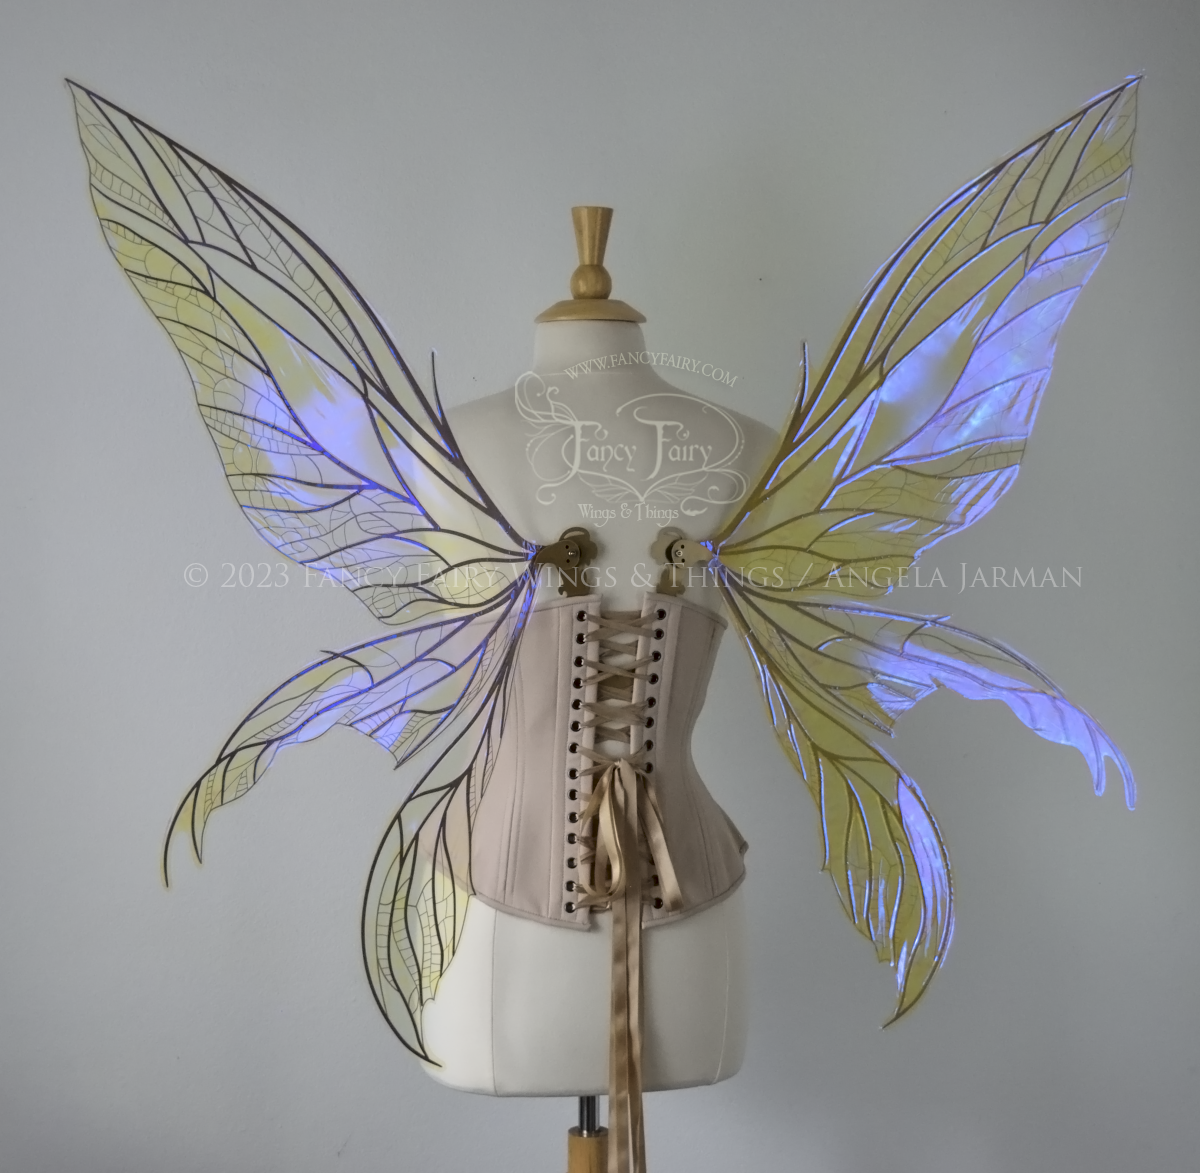 Back view of an ivory dress form wearing an alabaster underbust corset & large violet iridescent fairy wings. Upper panels are elongated with pointed tips, 2 lower panels curve downward, lots of thin vein detail in gold